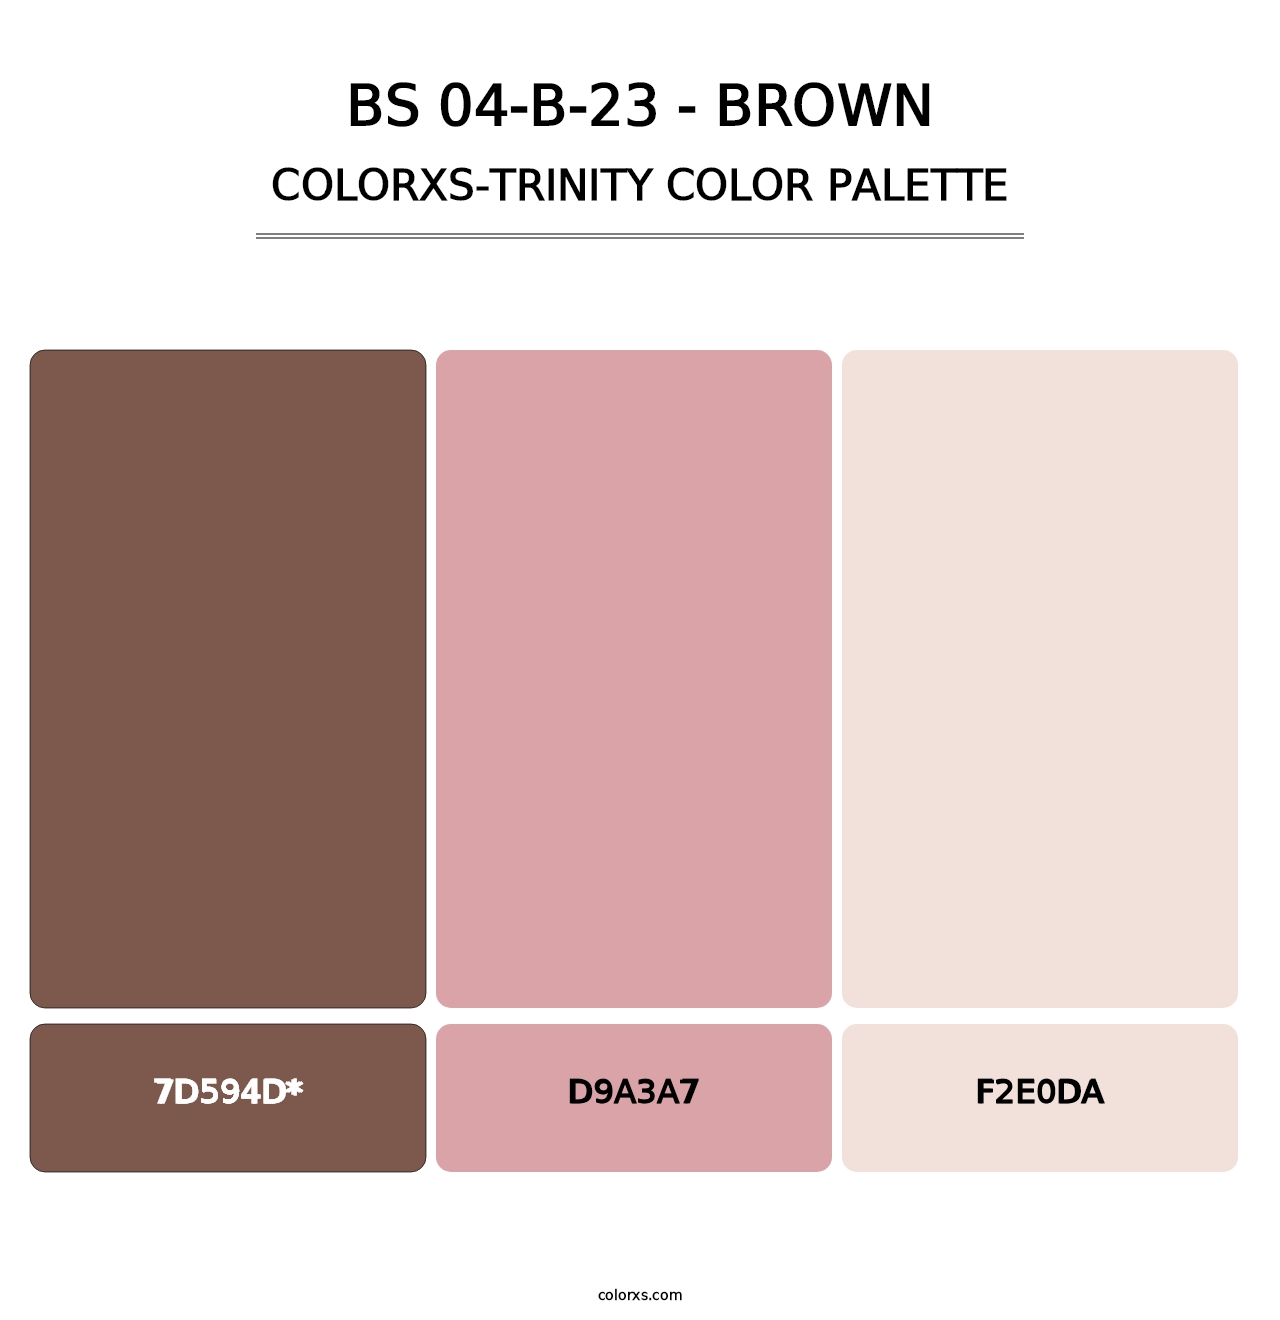 BS 04-B-23 - Brown - Colorxs Trinity Palette